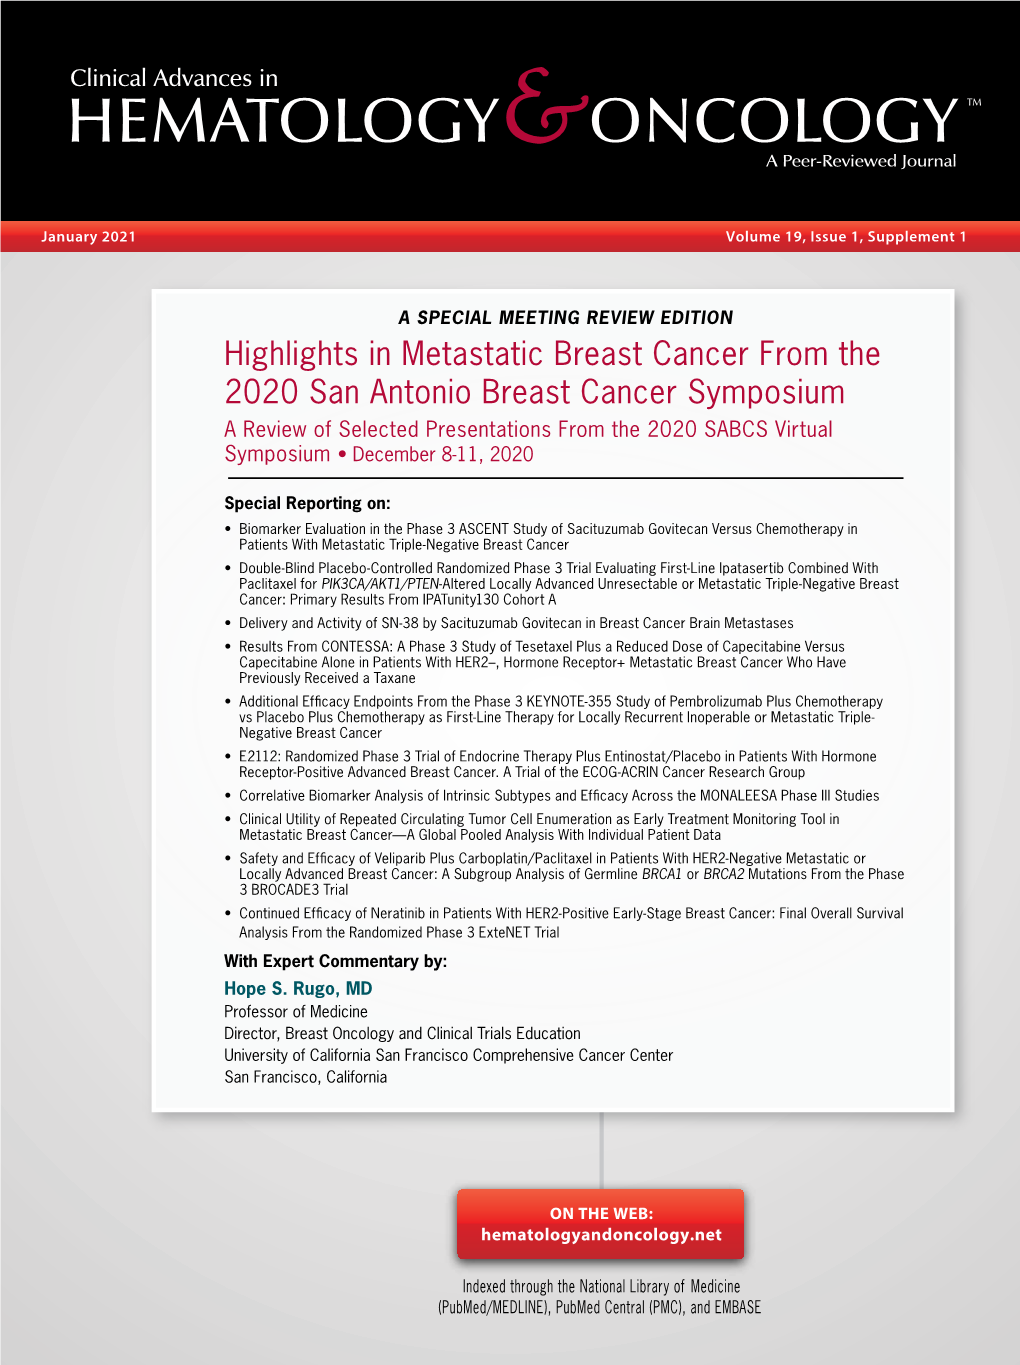 Highlights in Metastatic Breast Cancer from the 2020 San Antonio Breast